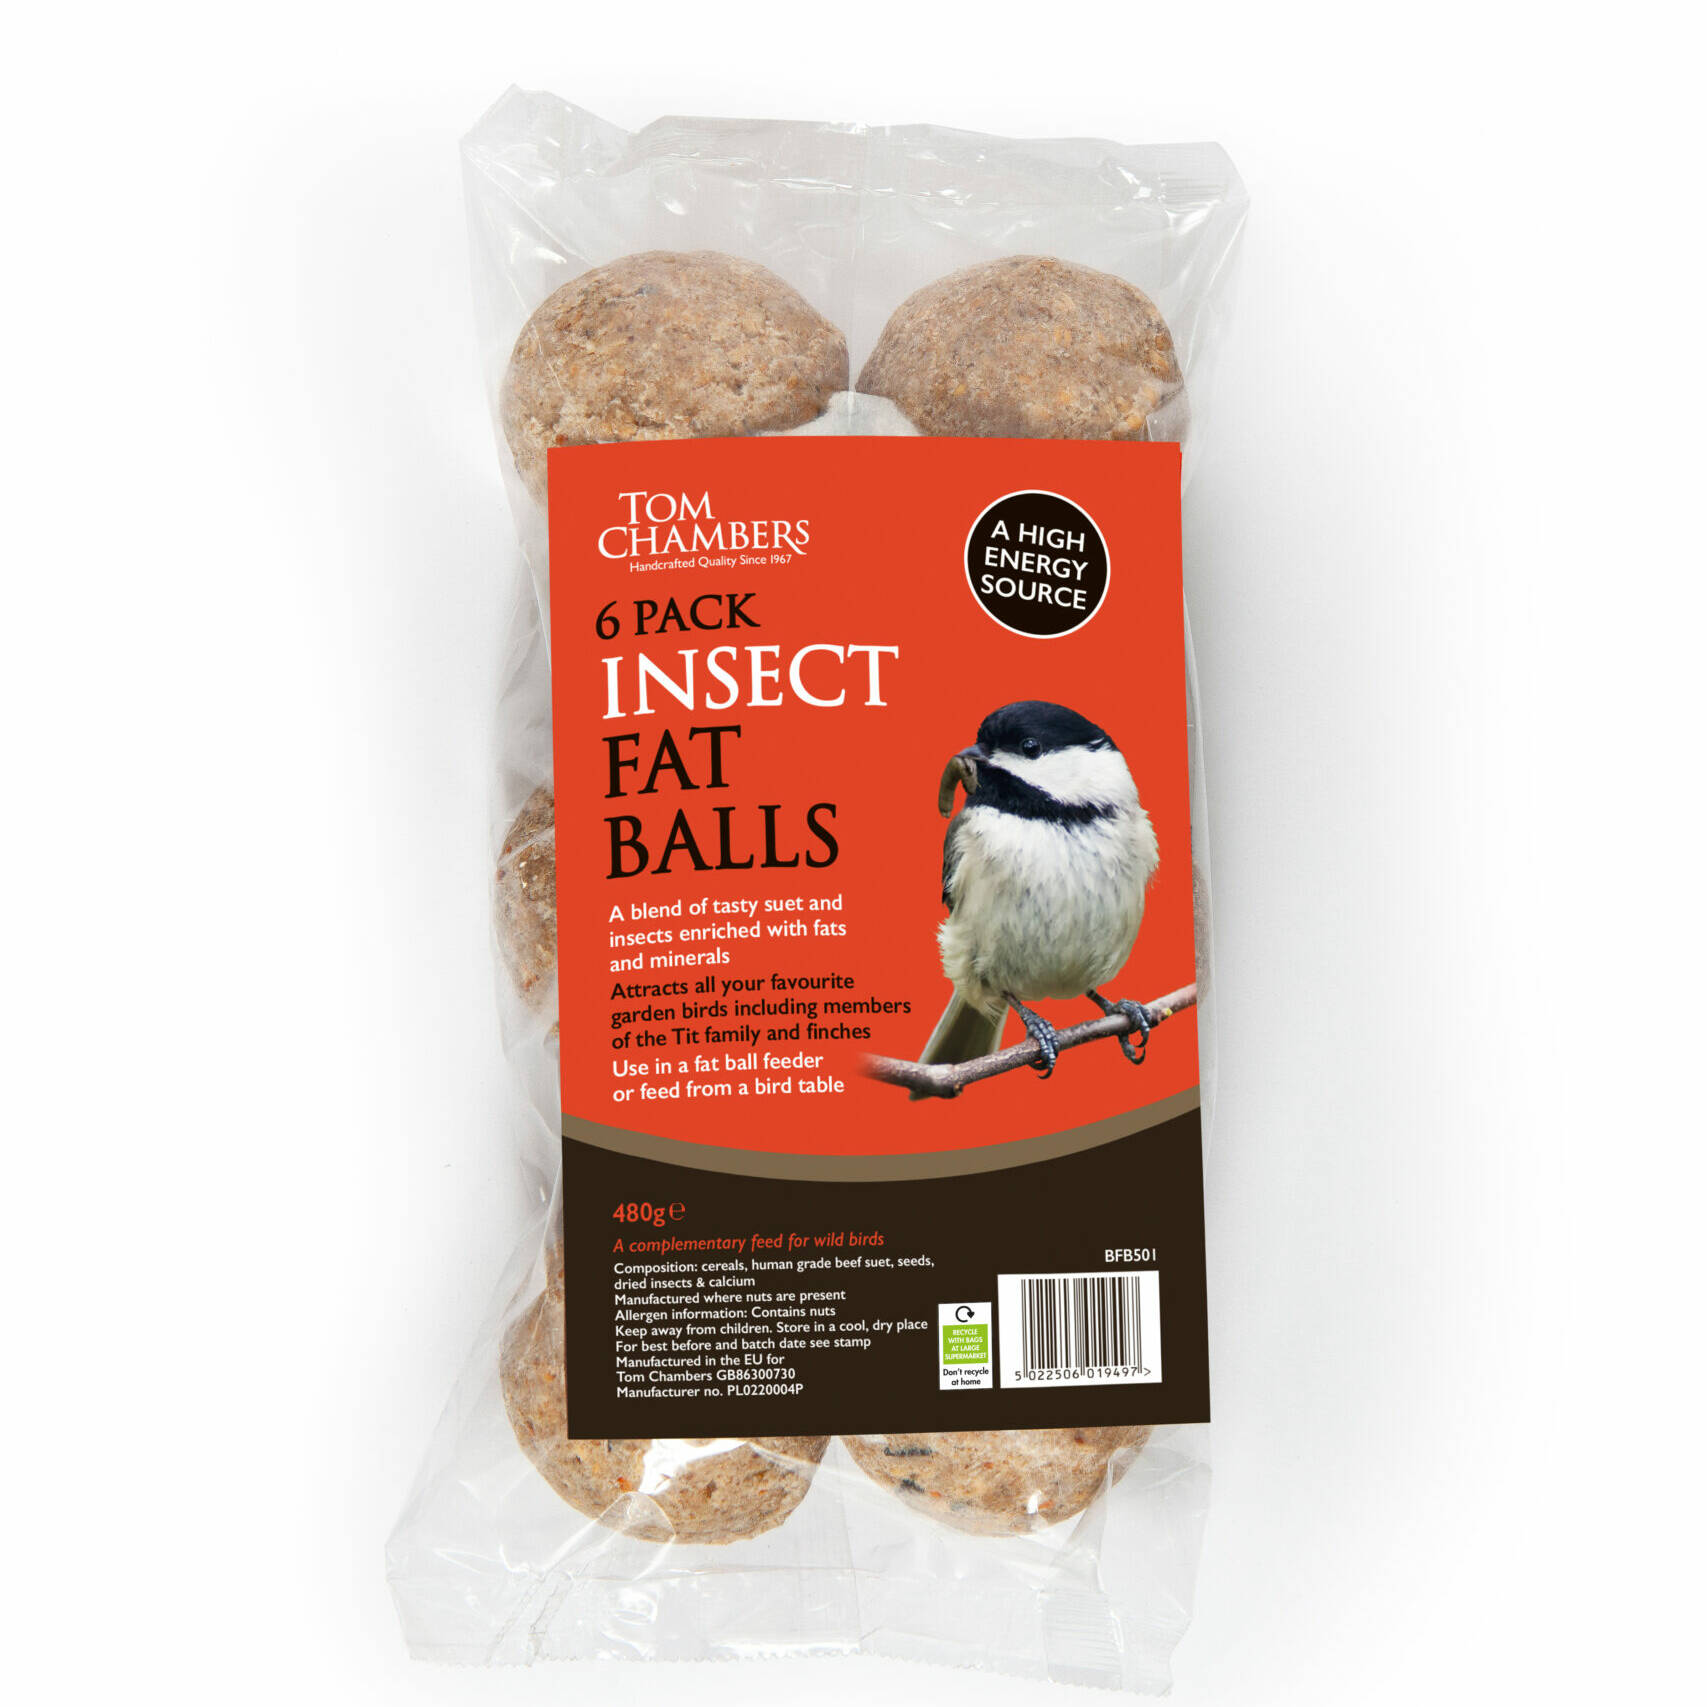 Tom chambers Fat Balls - 6 pack - Insect - No Nets